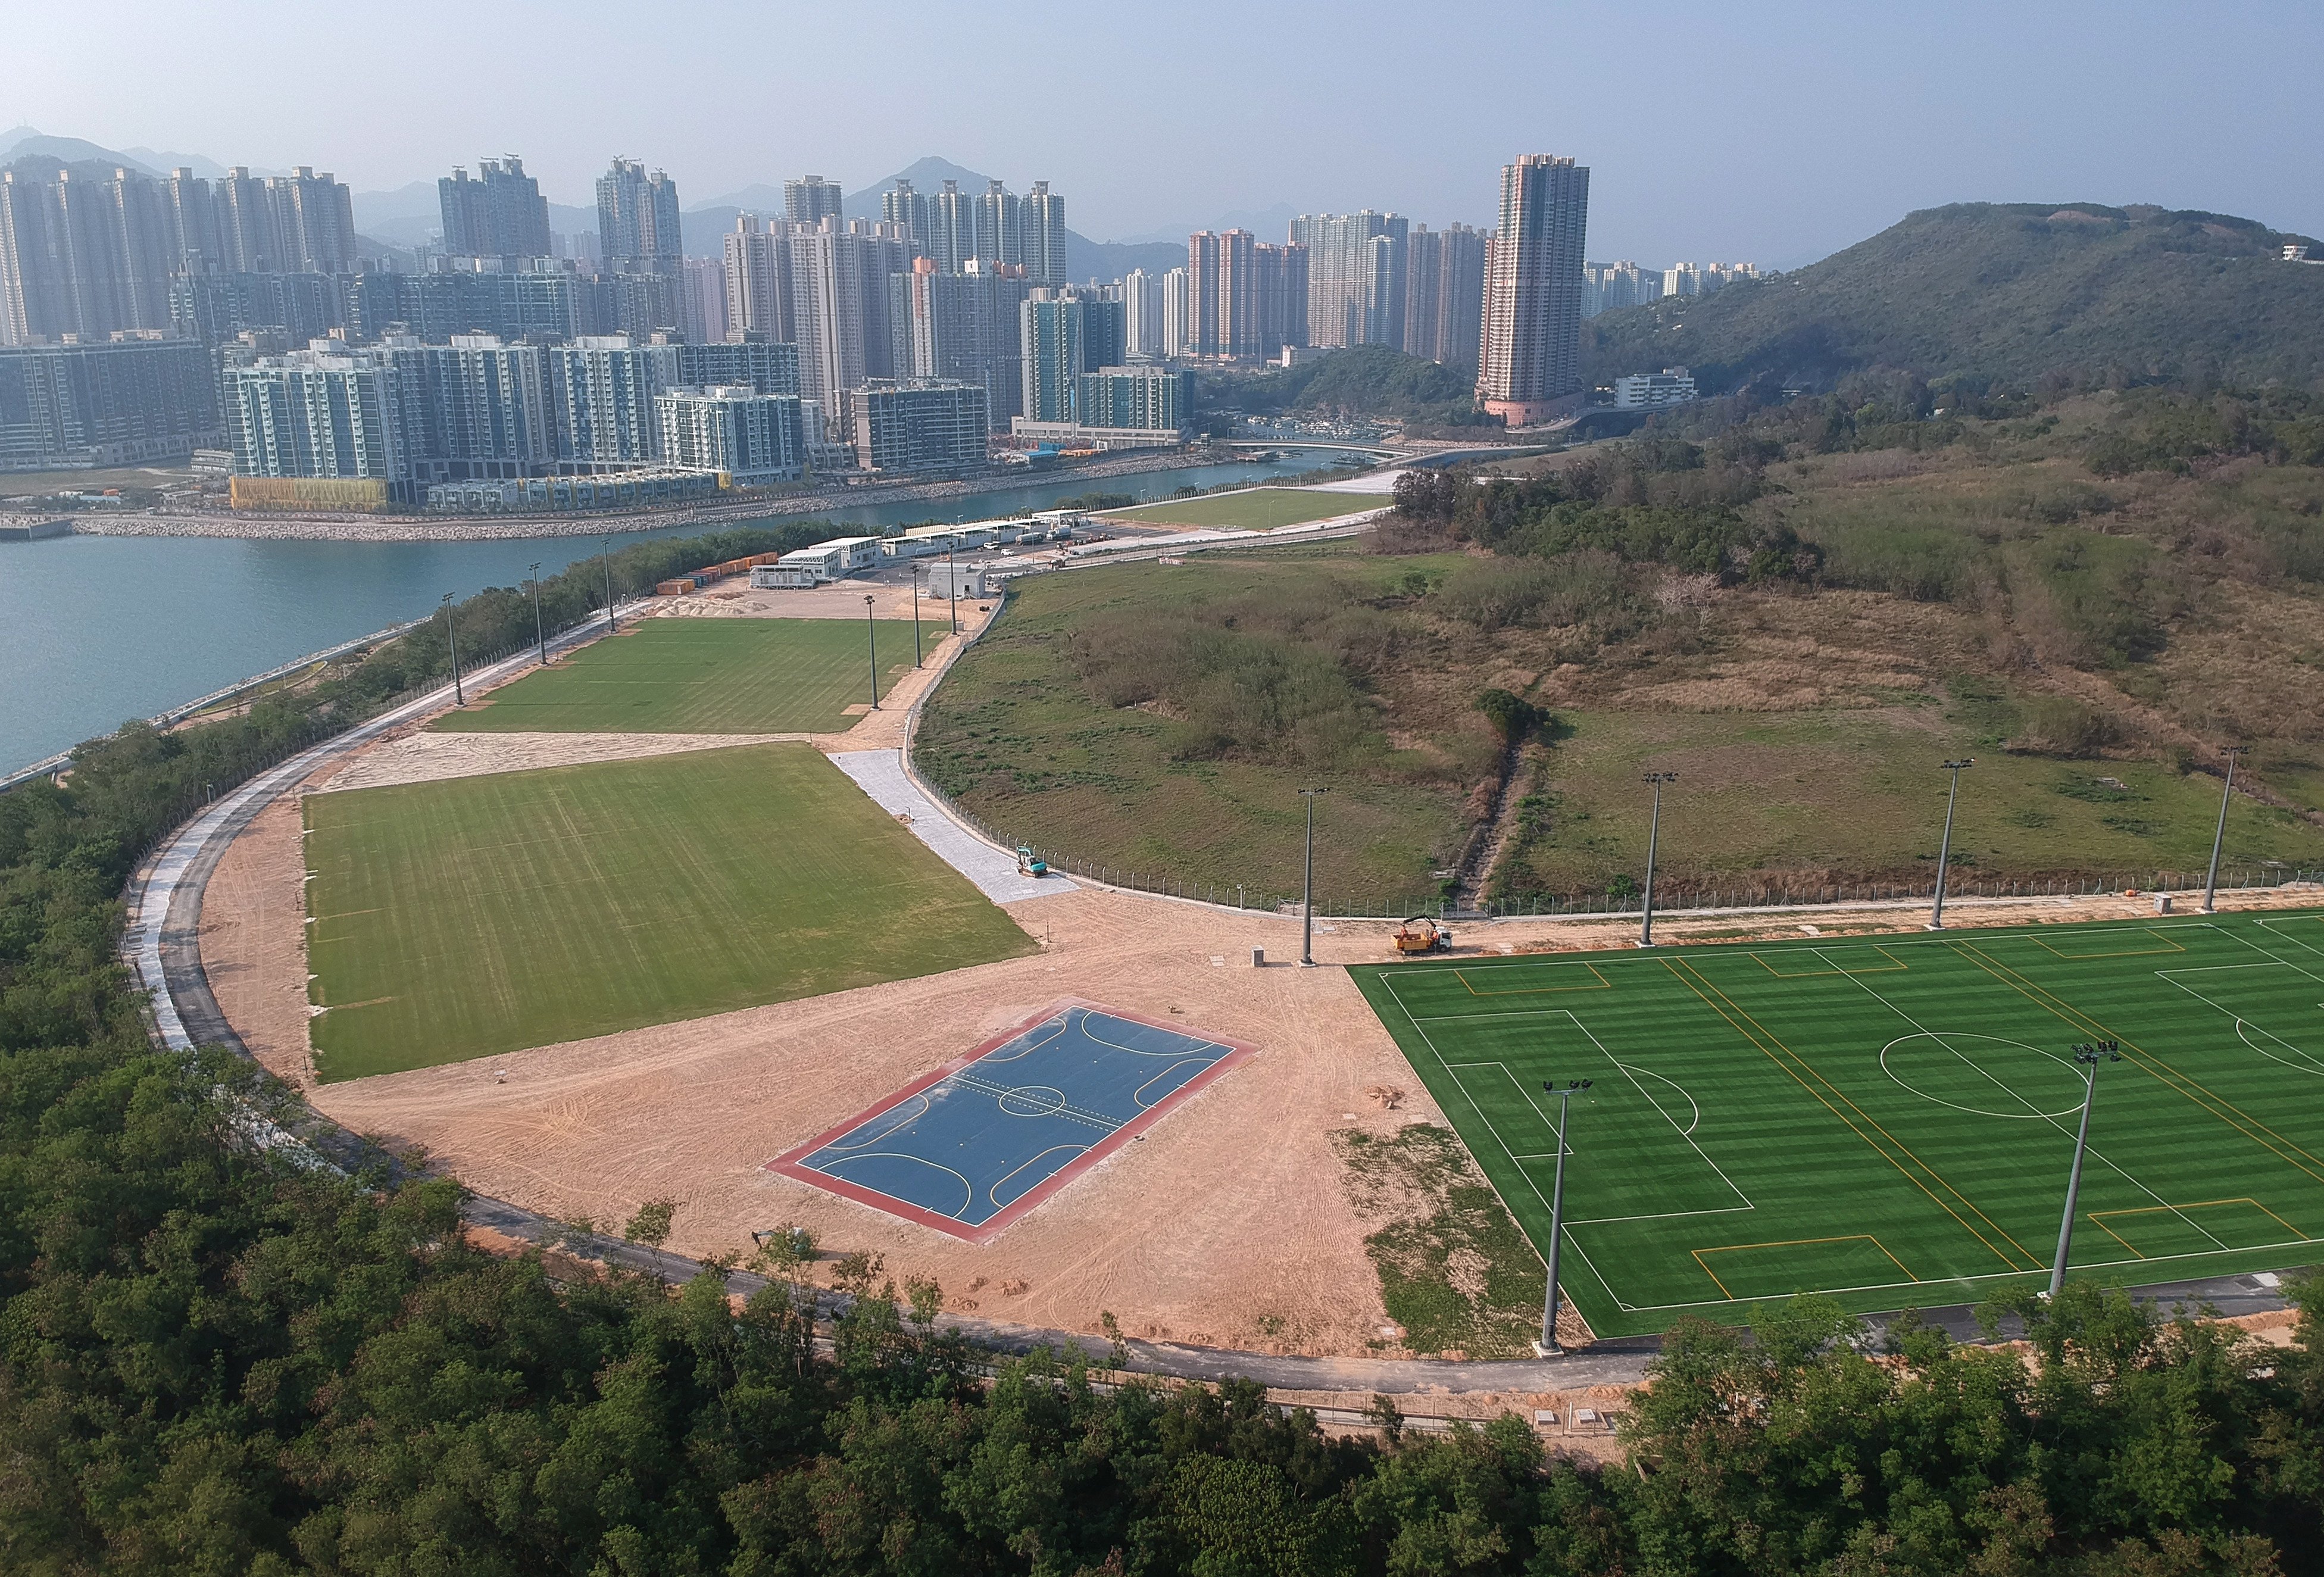 The HKFA has its Football Training Centre in Tseung Kwan O but its chairman said more efforts were needed to keep talent in the city. Photo: Martin Chan